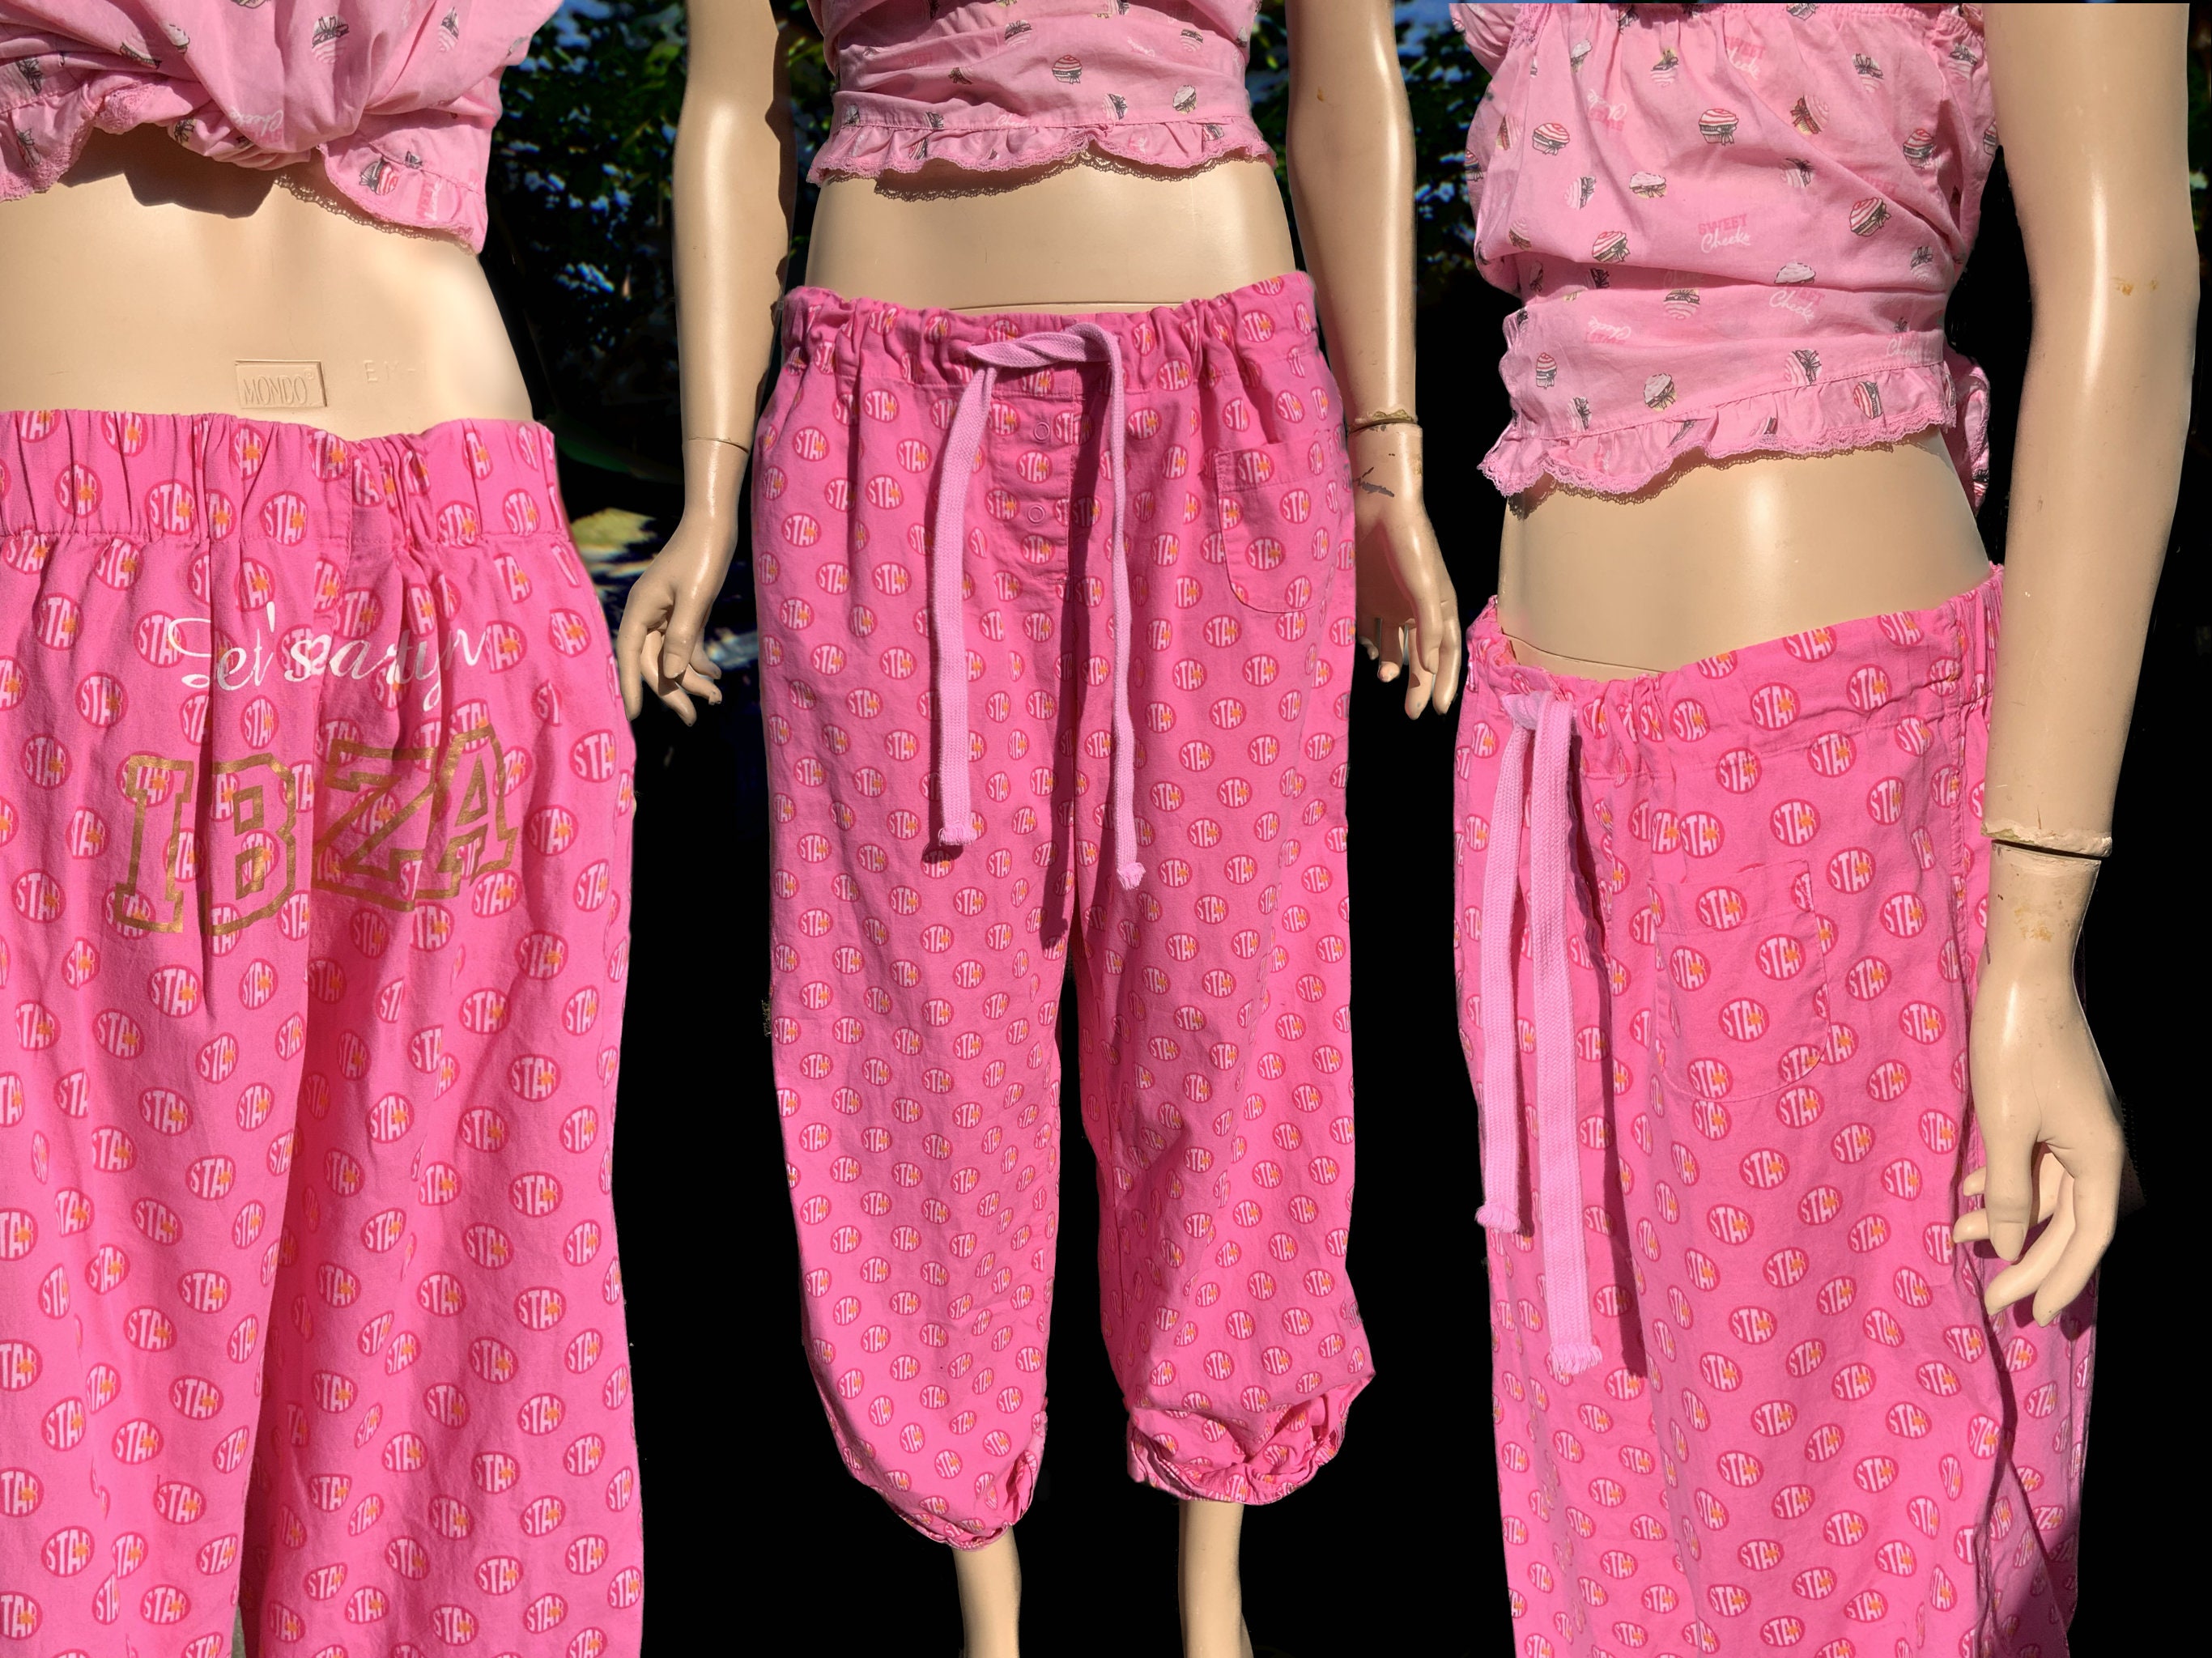 Victoria's Secret Pink 100% Polyester Solid Light Pink Velour Pants Size XS  - 55% off